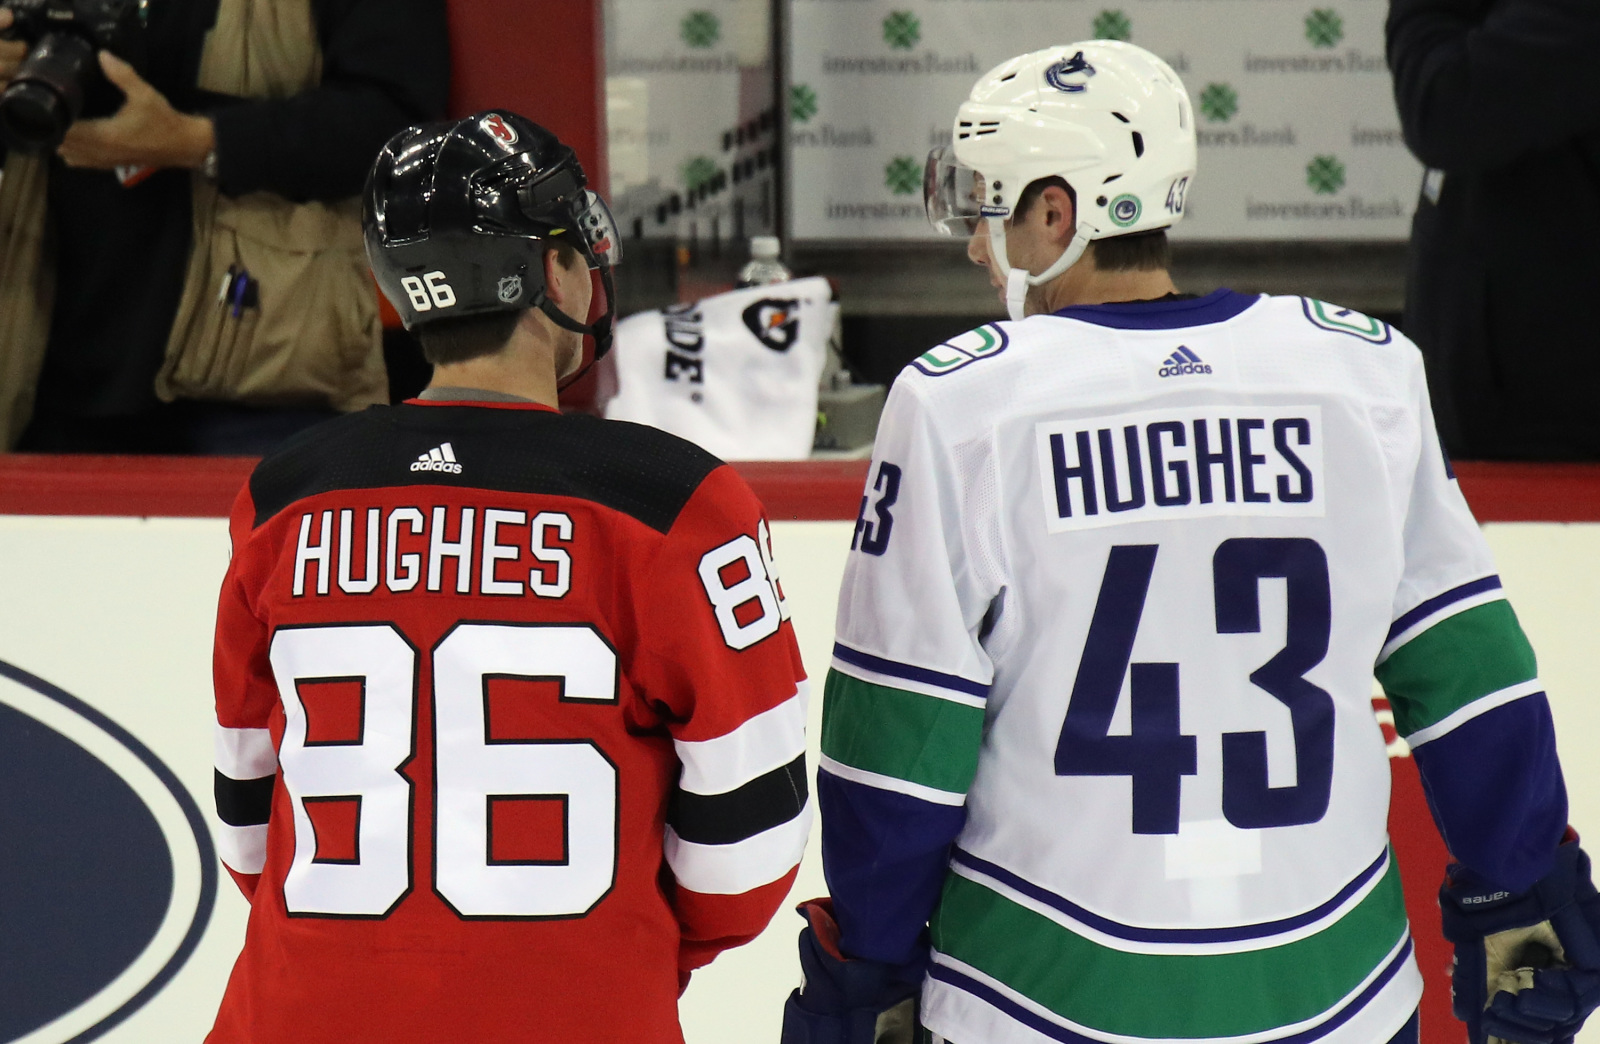 Luke Hughes' electric playoff debut earns high praise from Devils teammates